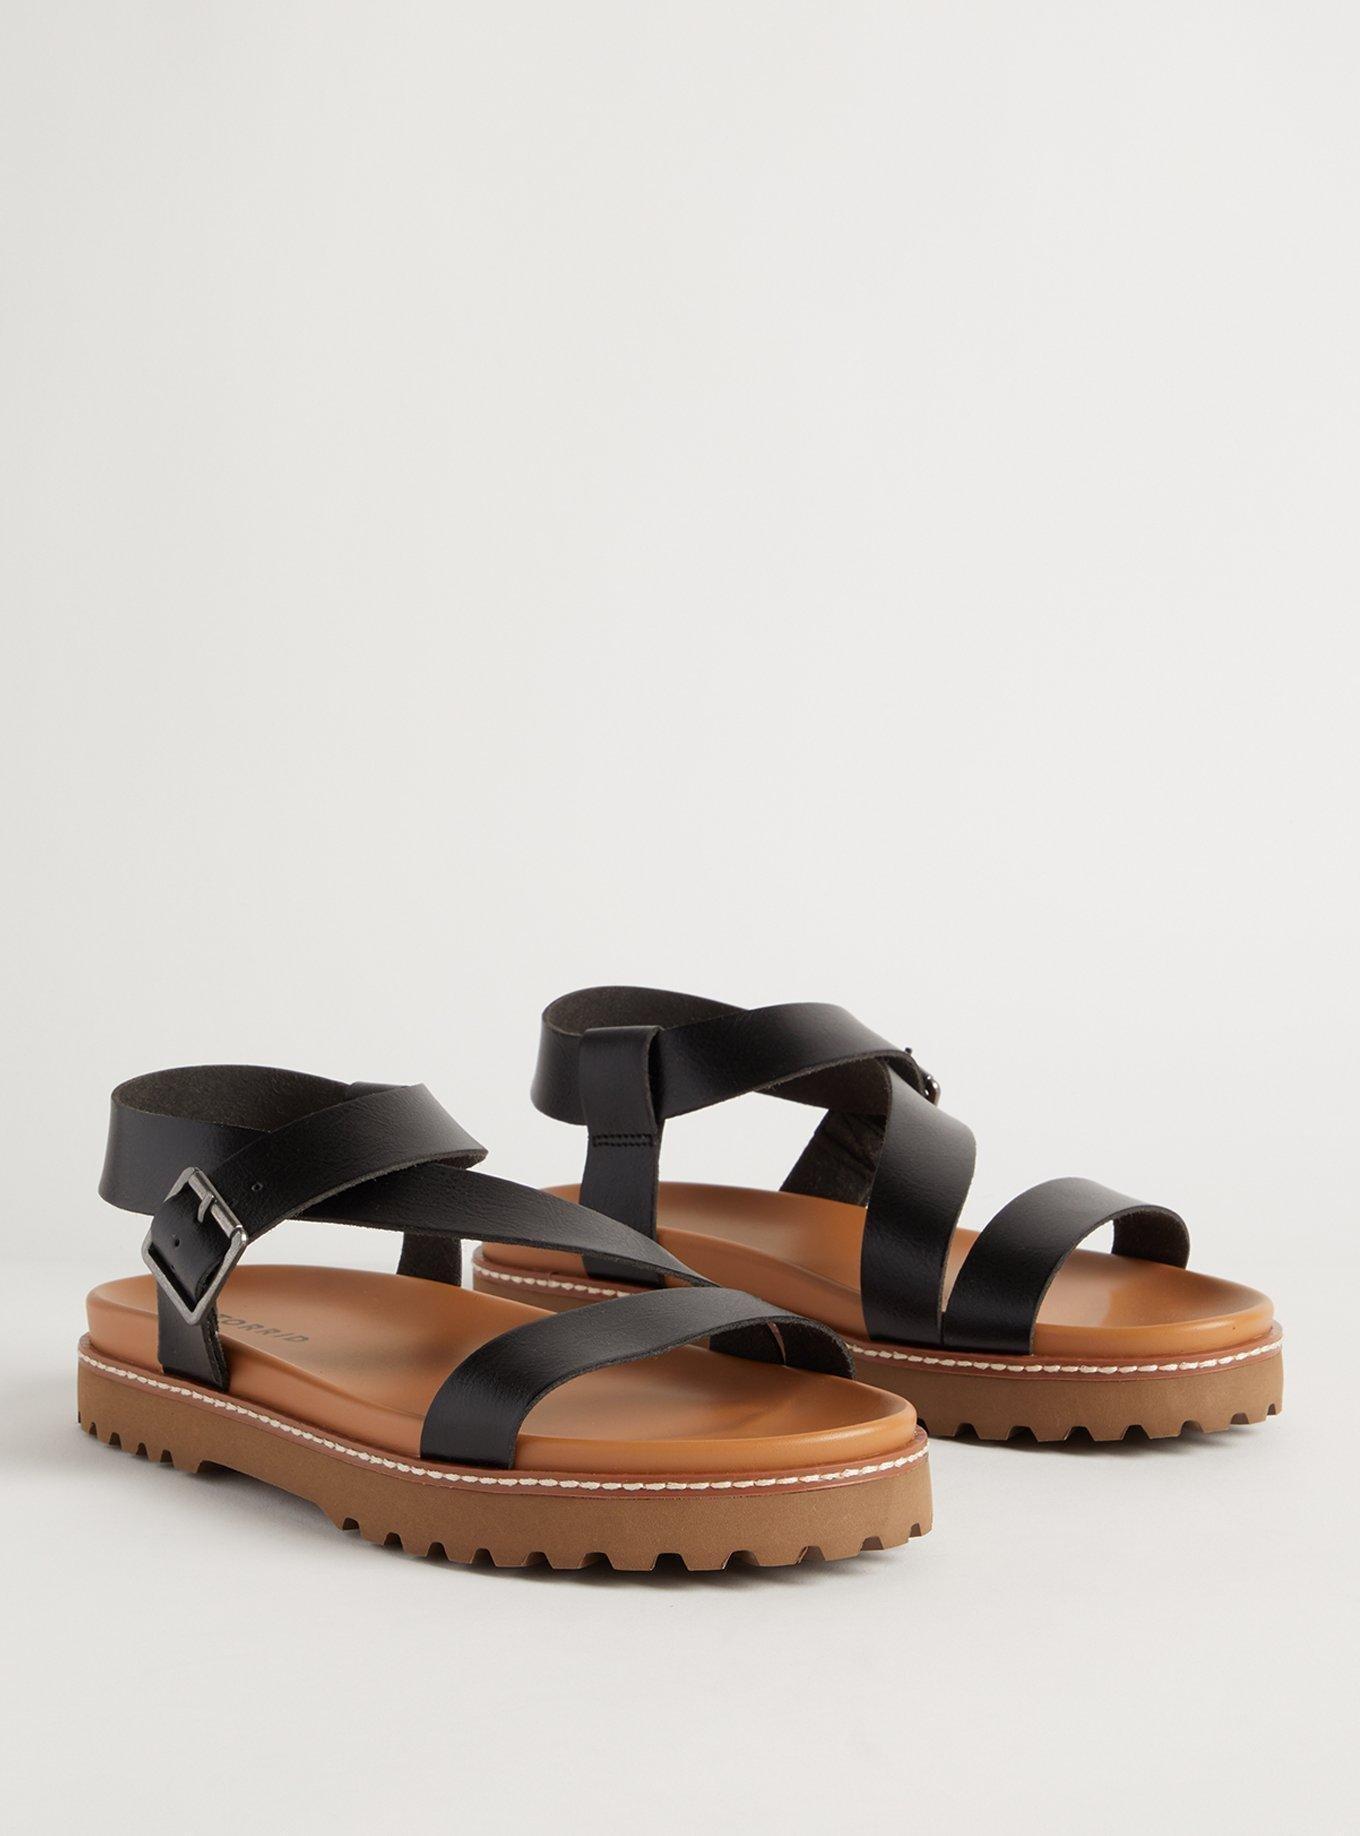 Graphic Strap leather sandals